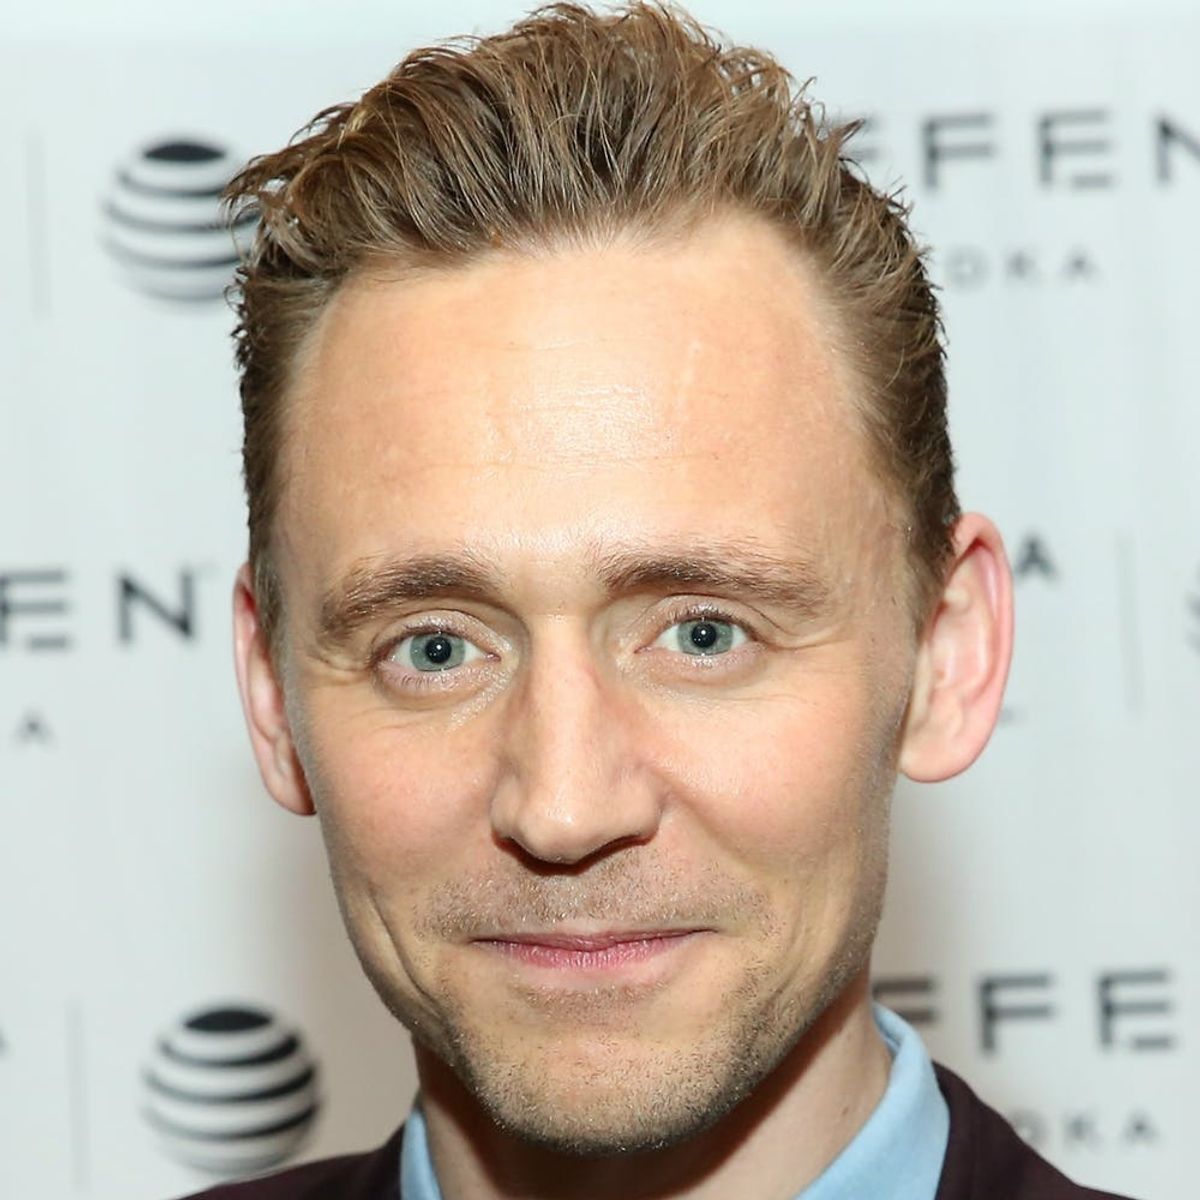 Tom Hiddleston Is the Latest Celeb to Fall Victim to a Hack Attack